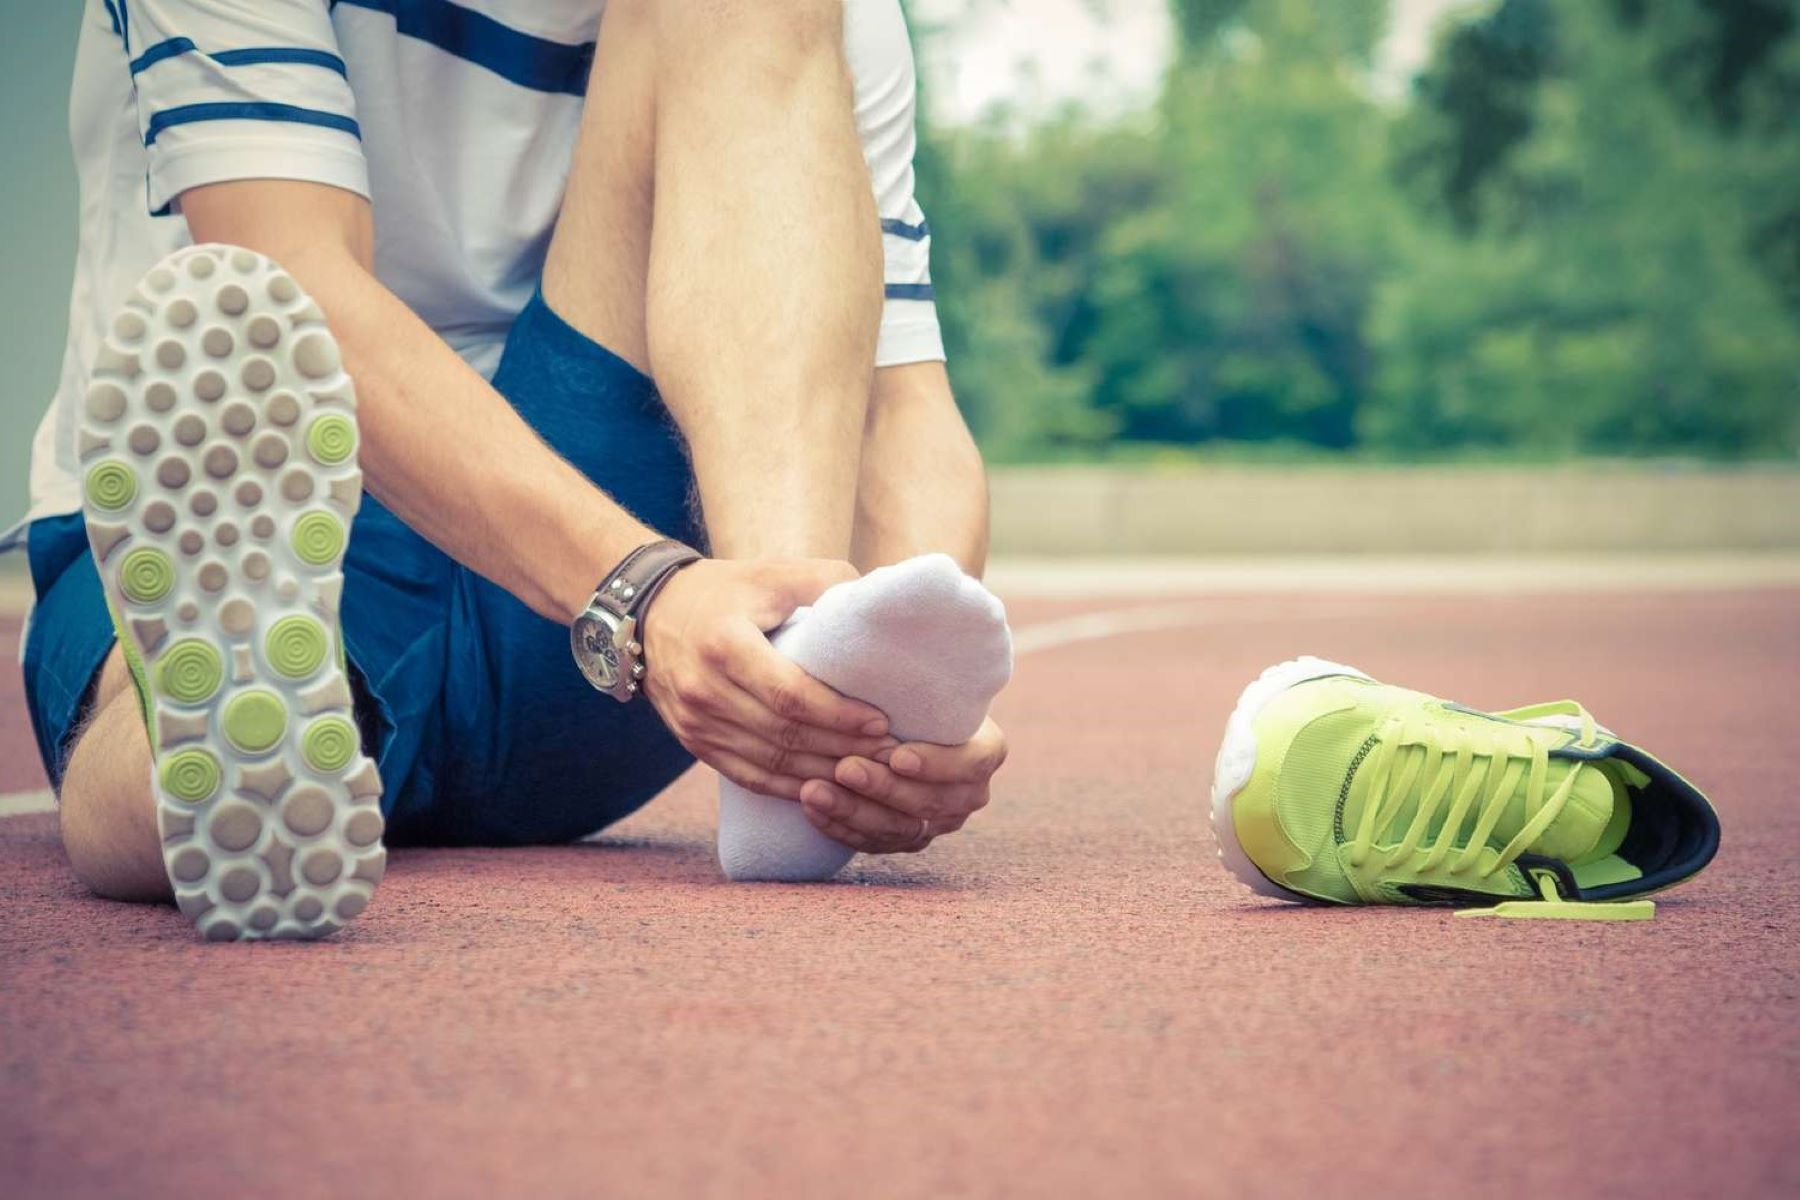 Running Injury First Aid - The RICE Method